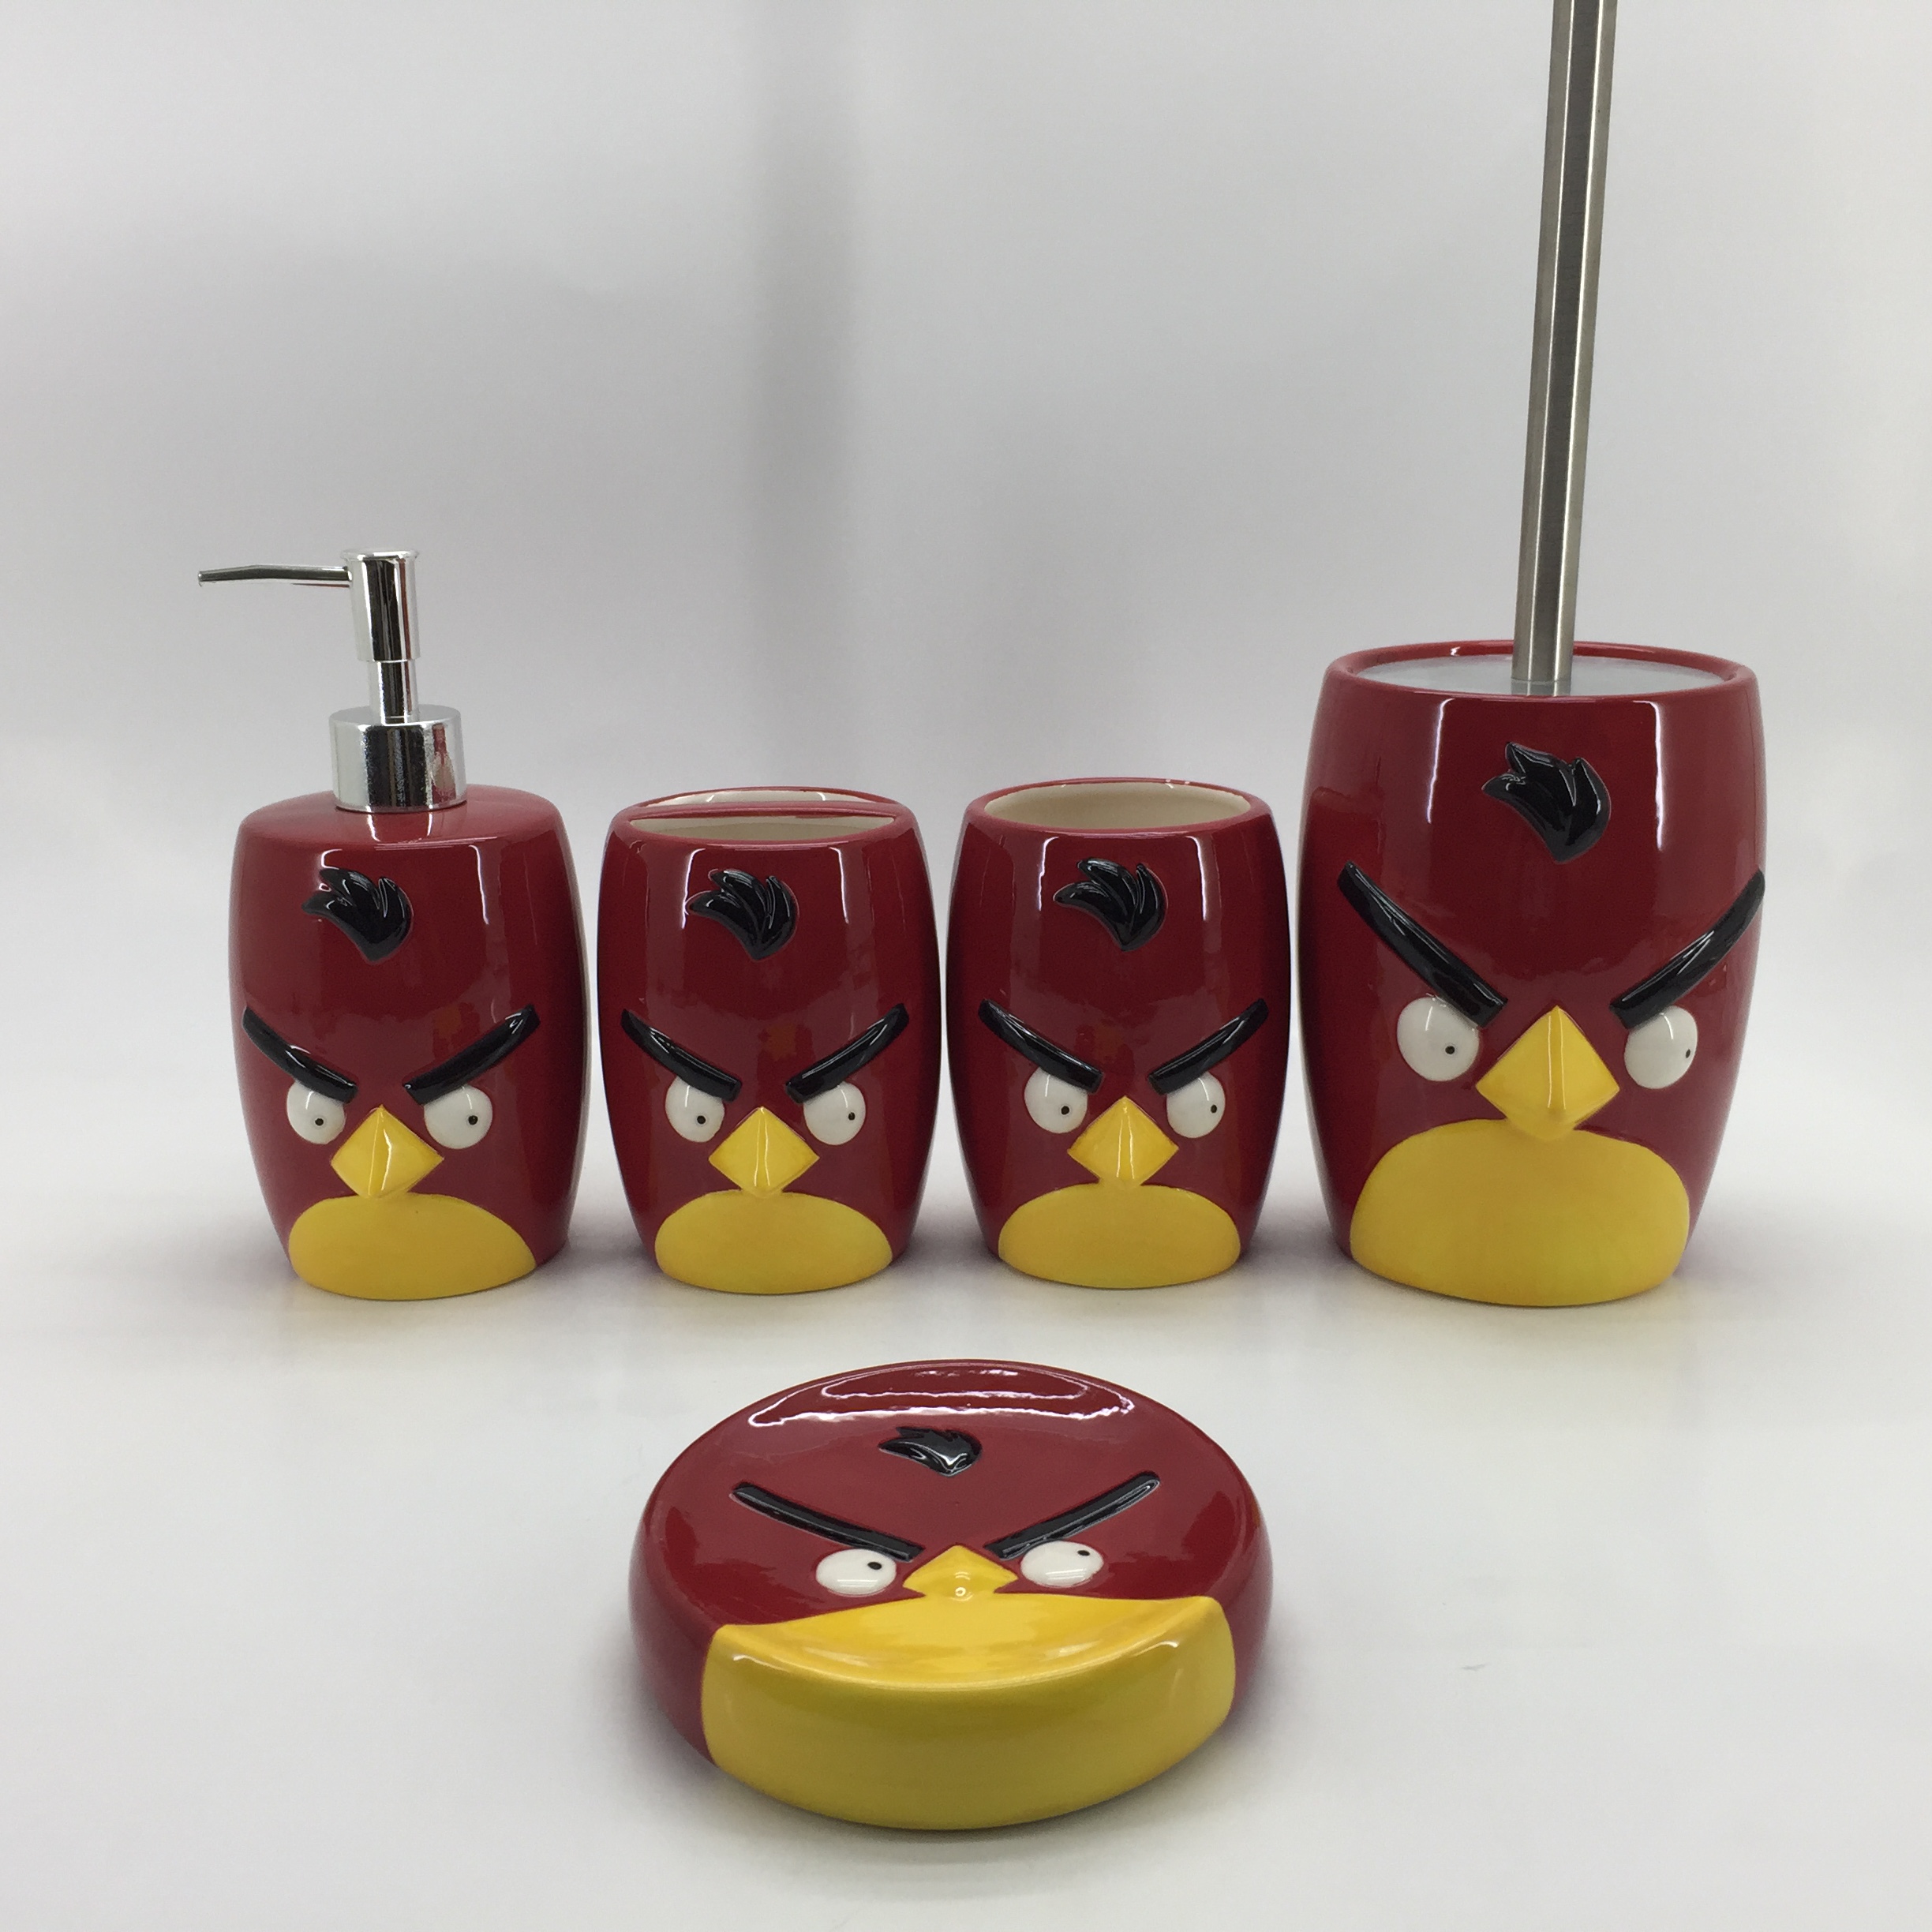 Vivid Red Angry Bird Shaped Bathroom Accessories Set